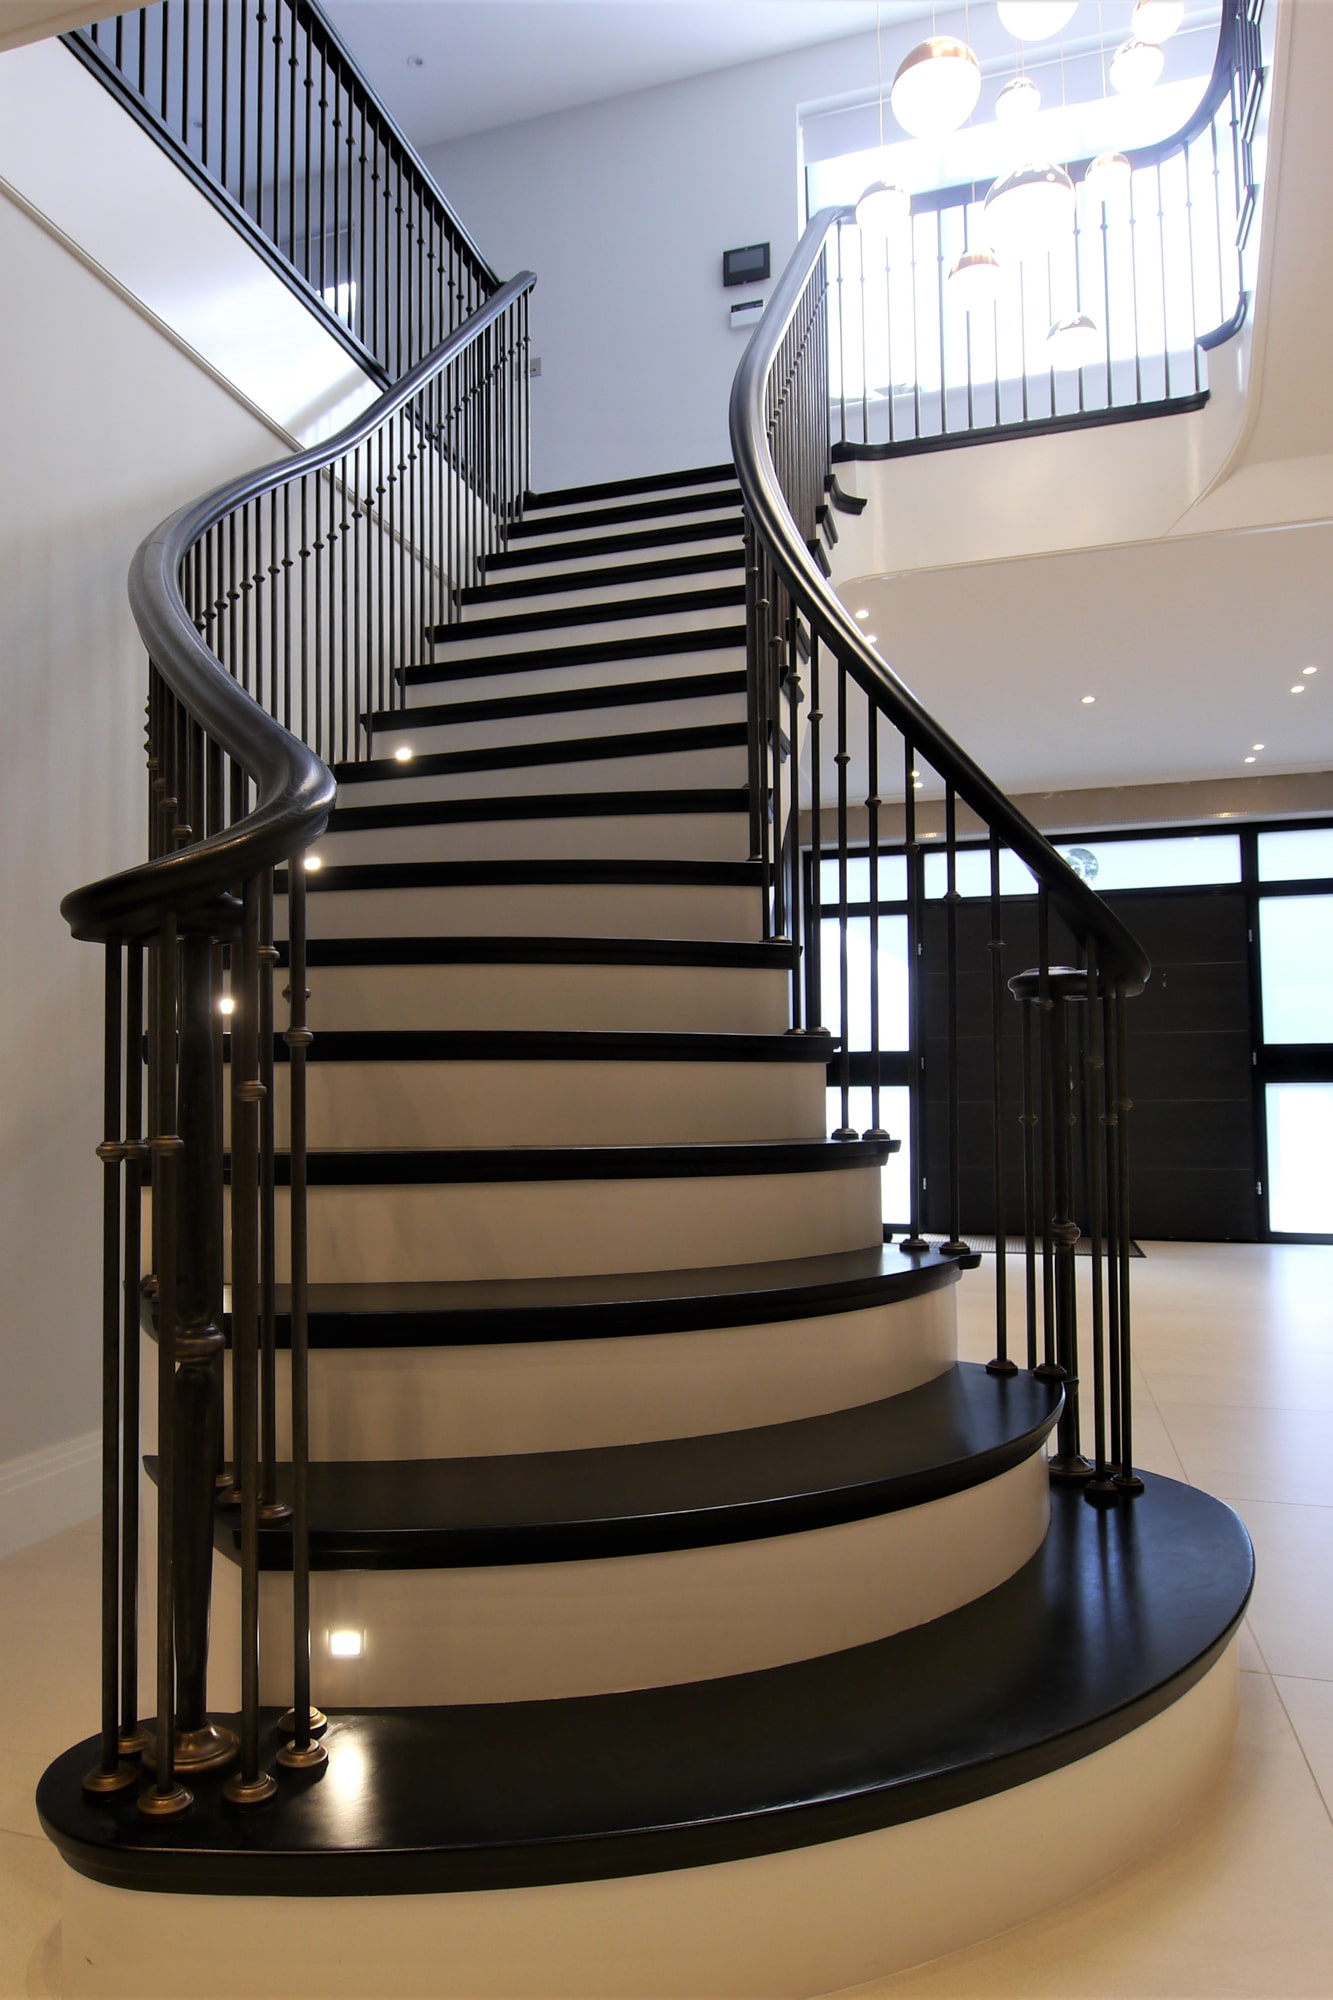 Bespoke curved staircase in Elstree Hertfordshire